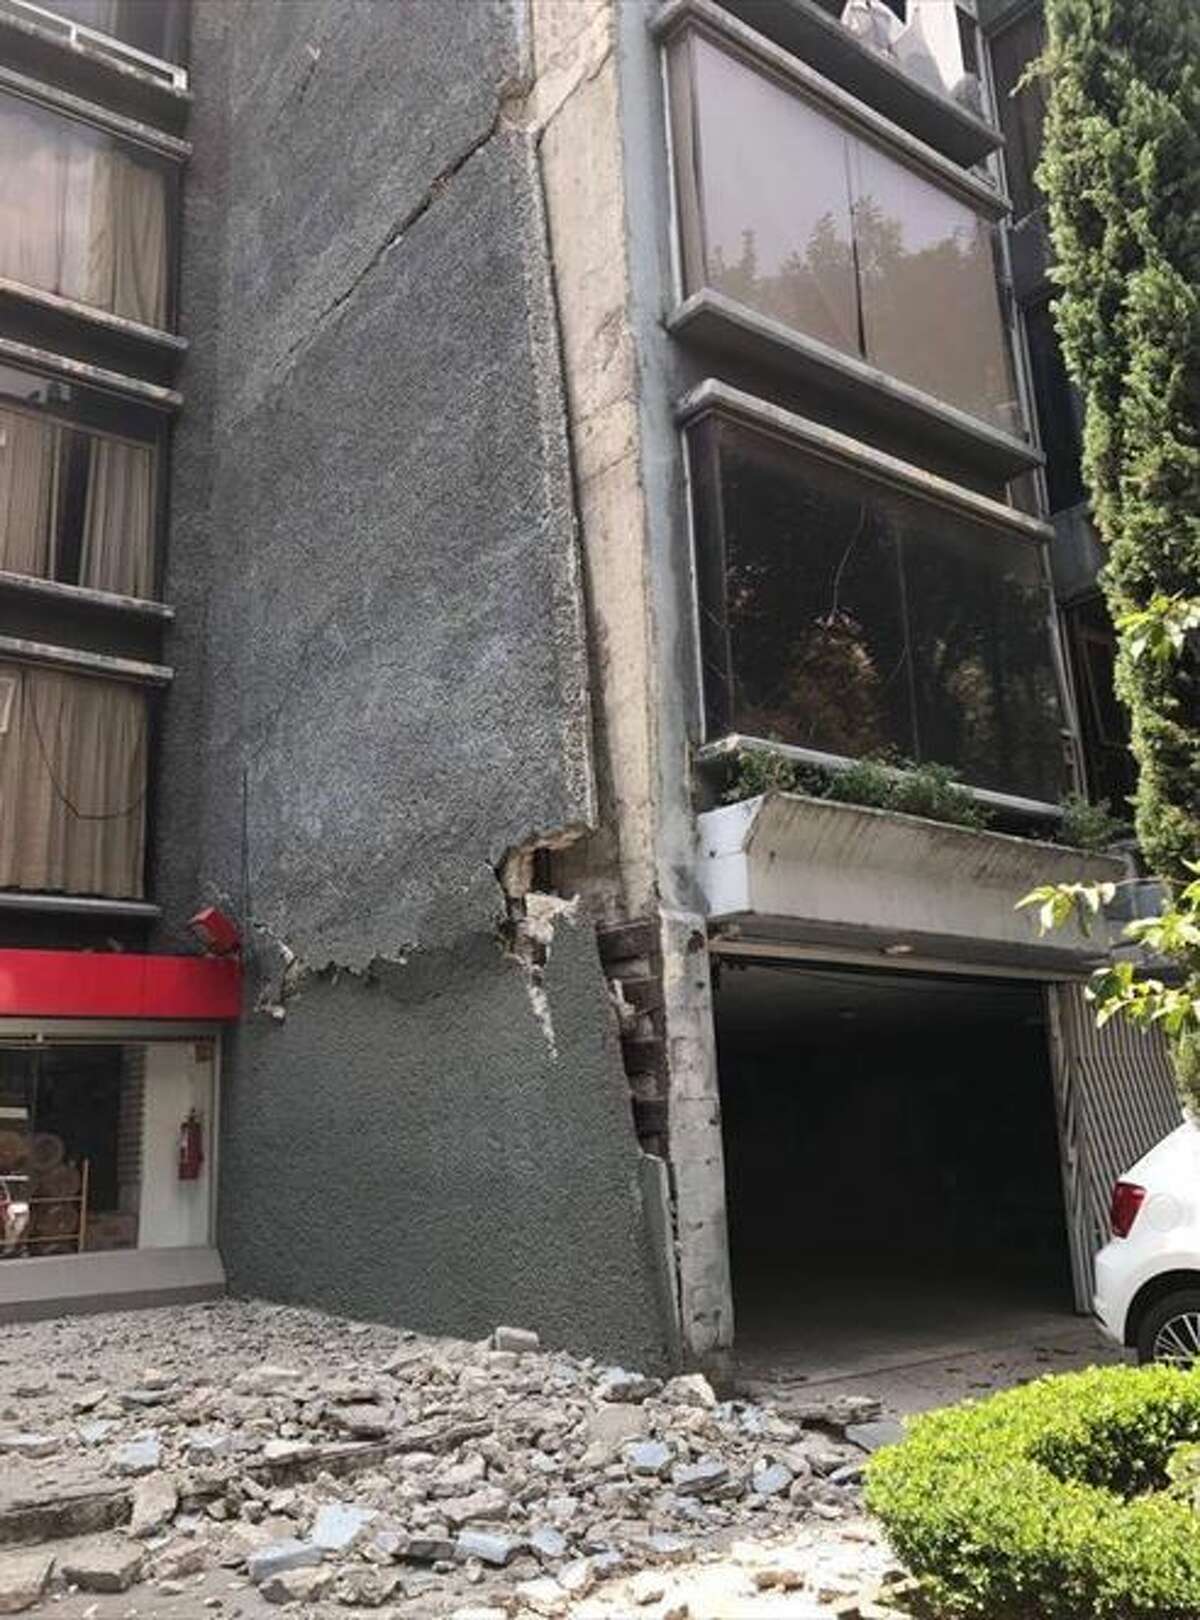 A partially collapsed building located in Colonia Juárez, was Nuevo Laredoan Ethel Gonzá 